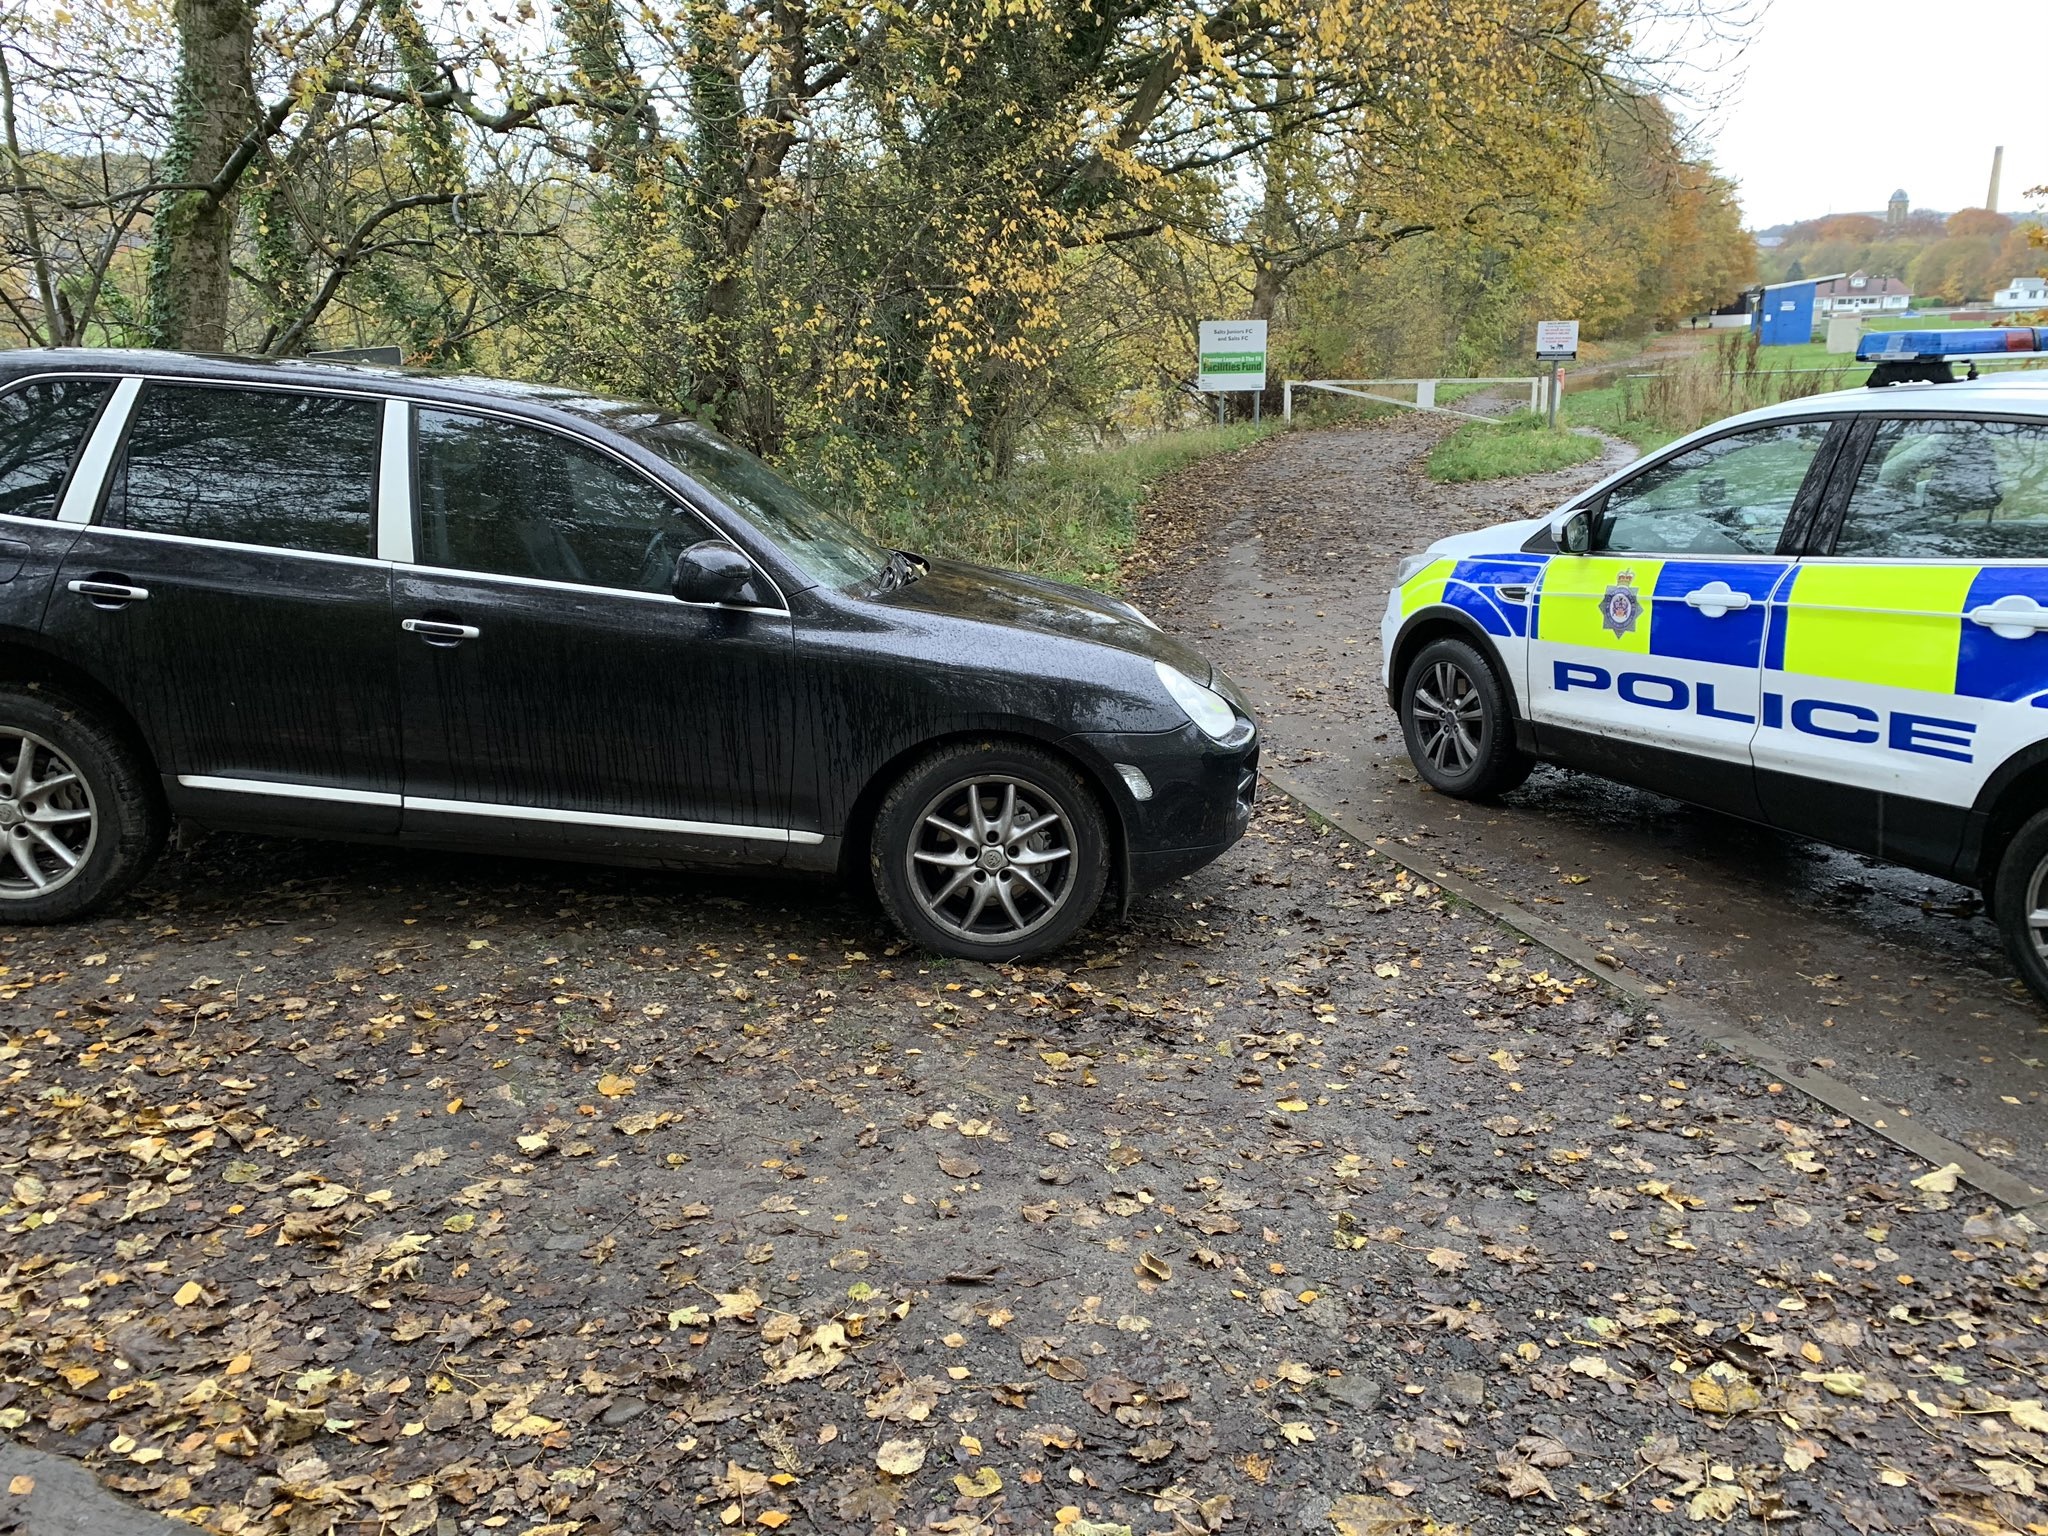 Police recover stolen car near River Aire, just outside Saltaire